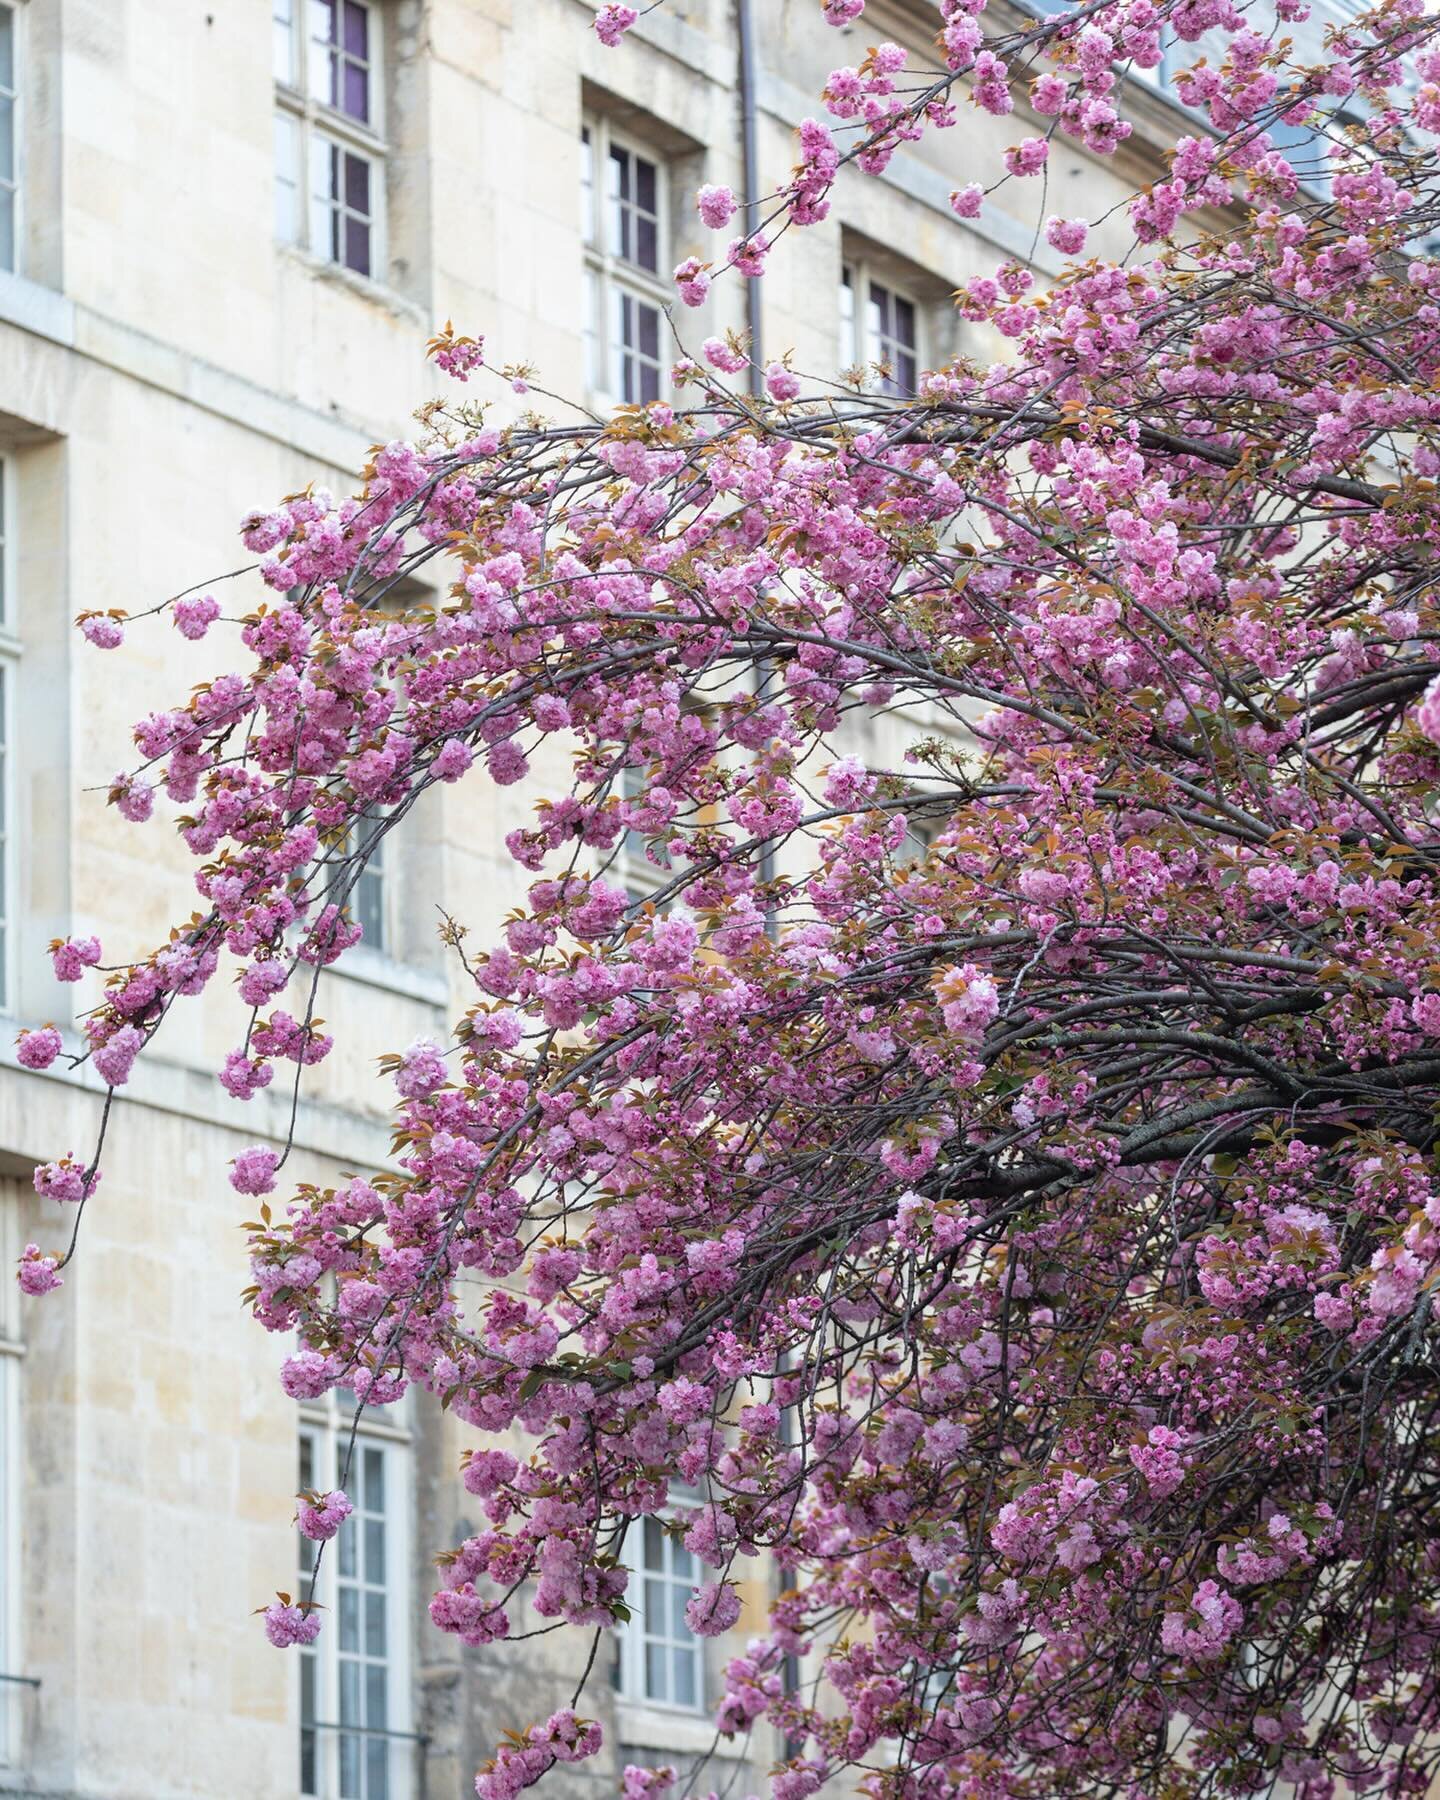 Spring in Paris. These photos are several days old and things change quickly in the land of blossoms, especially when its warm. The Jardin des Plantes is at the height of its spring glory!